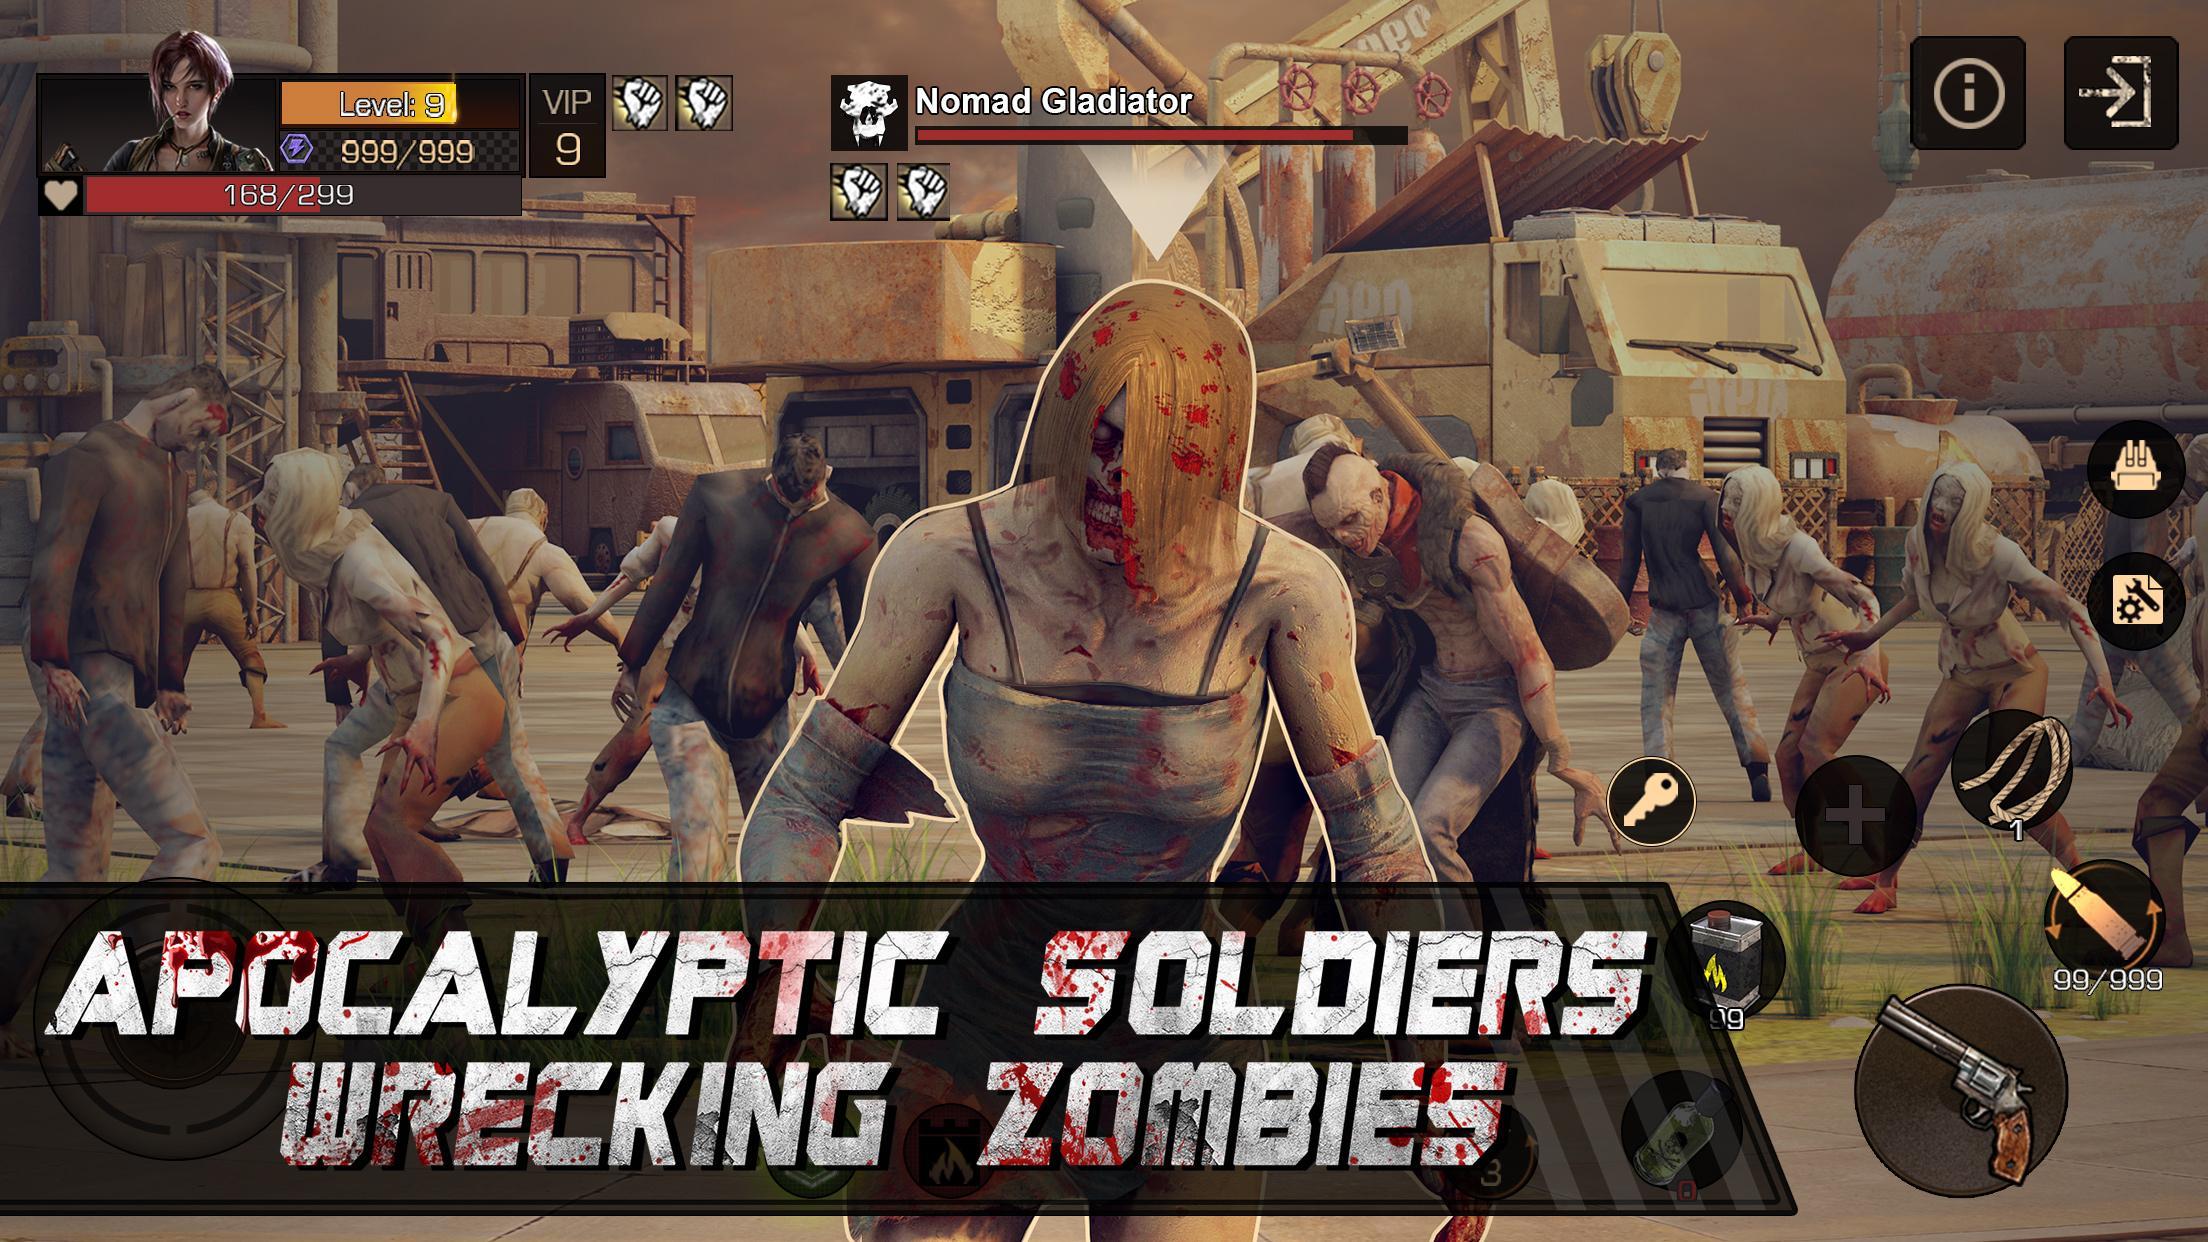 Modern Dead for Android - APK Download - 